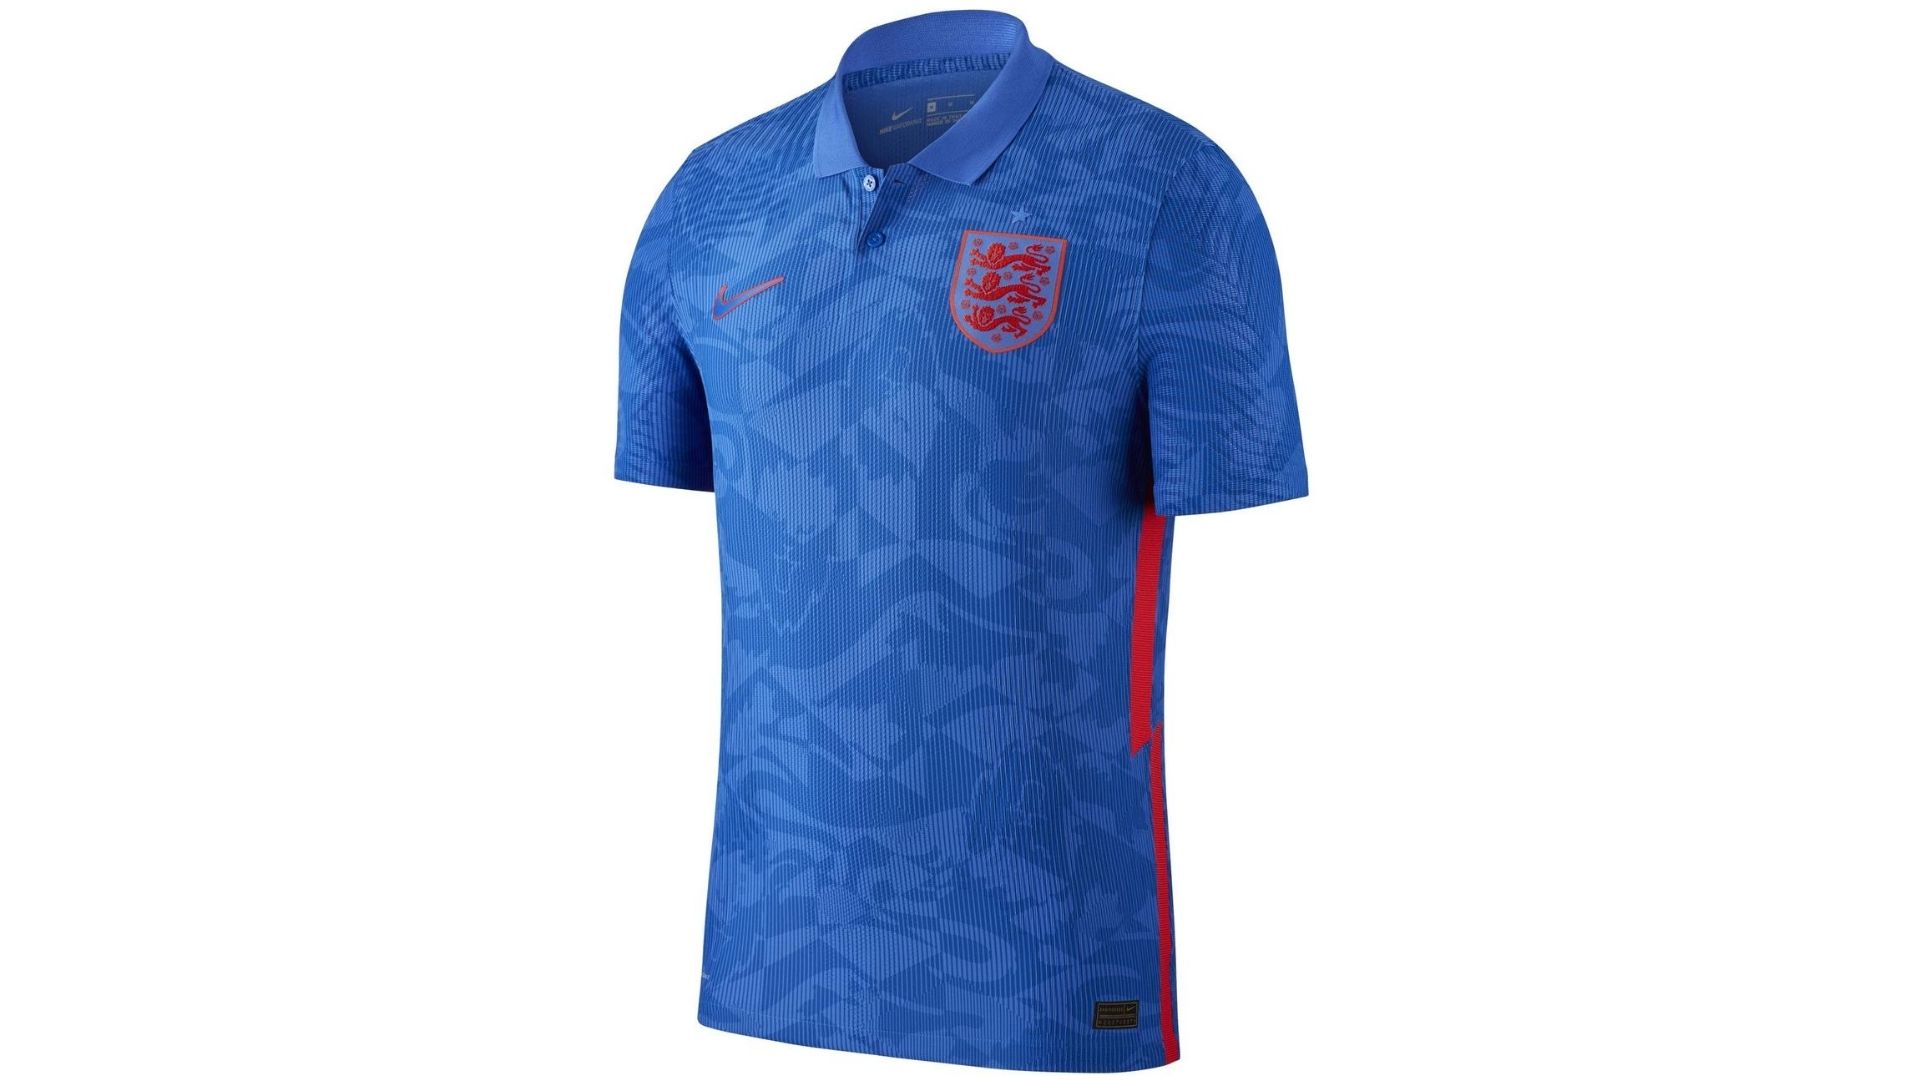 https://assets-fr.imgfoot.com/maillot-exterieur-angleterre-euro-2021-img1.jpg